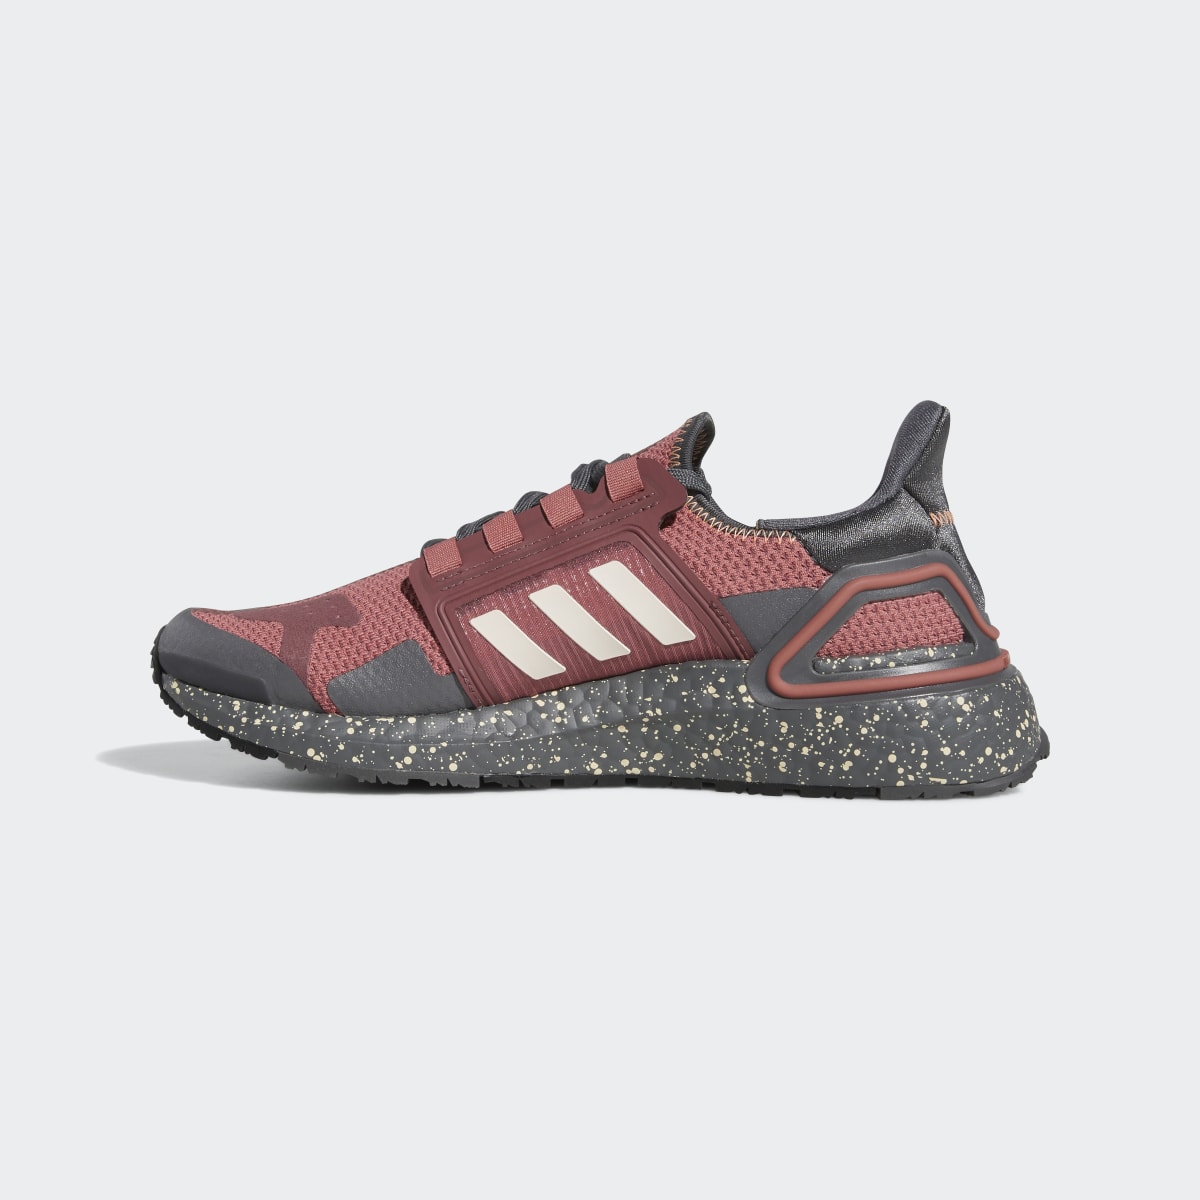 Adidas Ultraboost DNA City Explorer Outdoor Trail Running Sportswear Lifestyle Shoes. 7